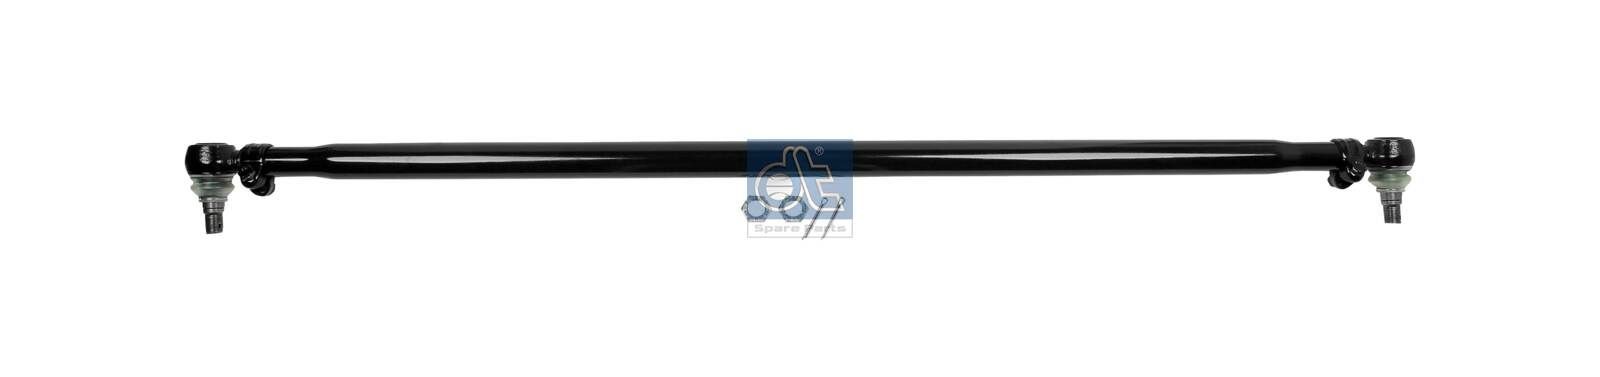 DT Spare Parts 7.30012 Rod Assembly 41005309